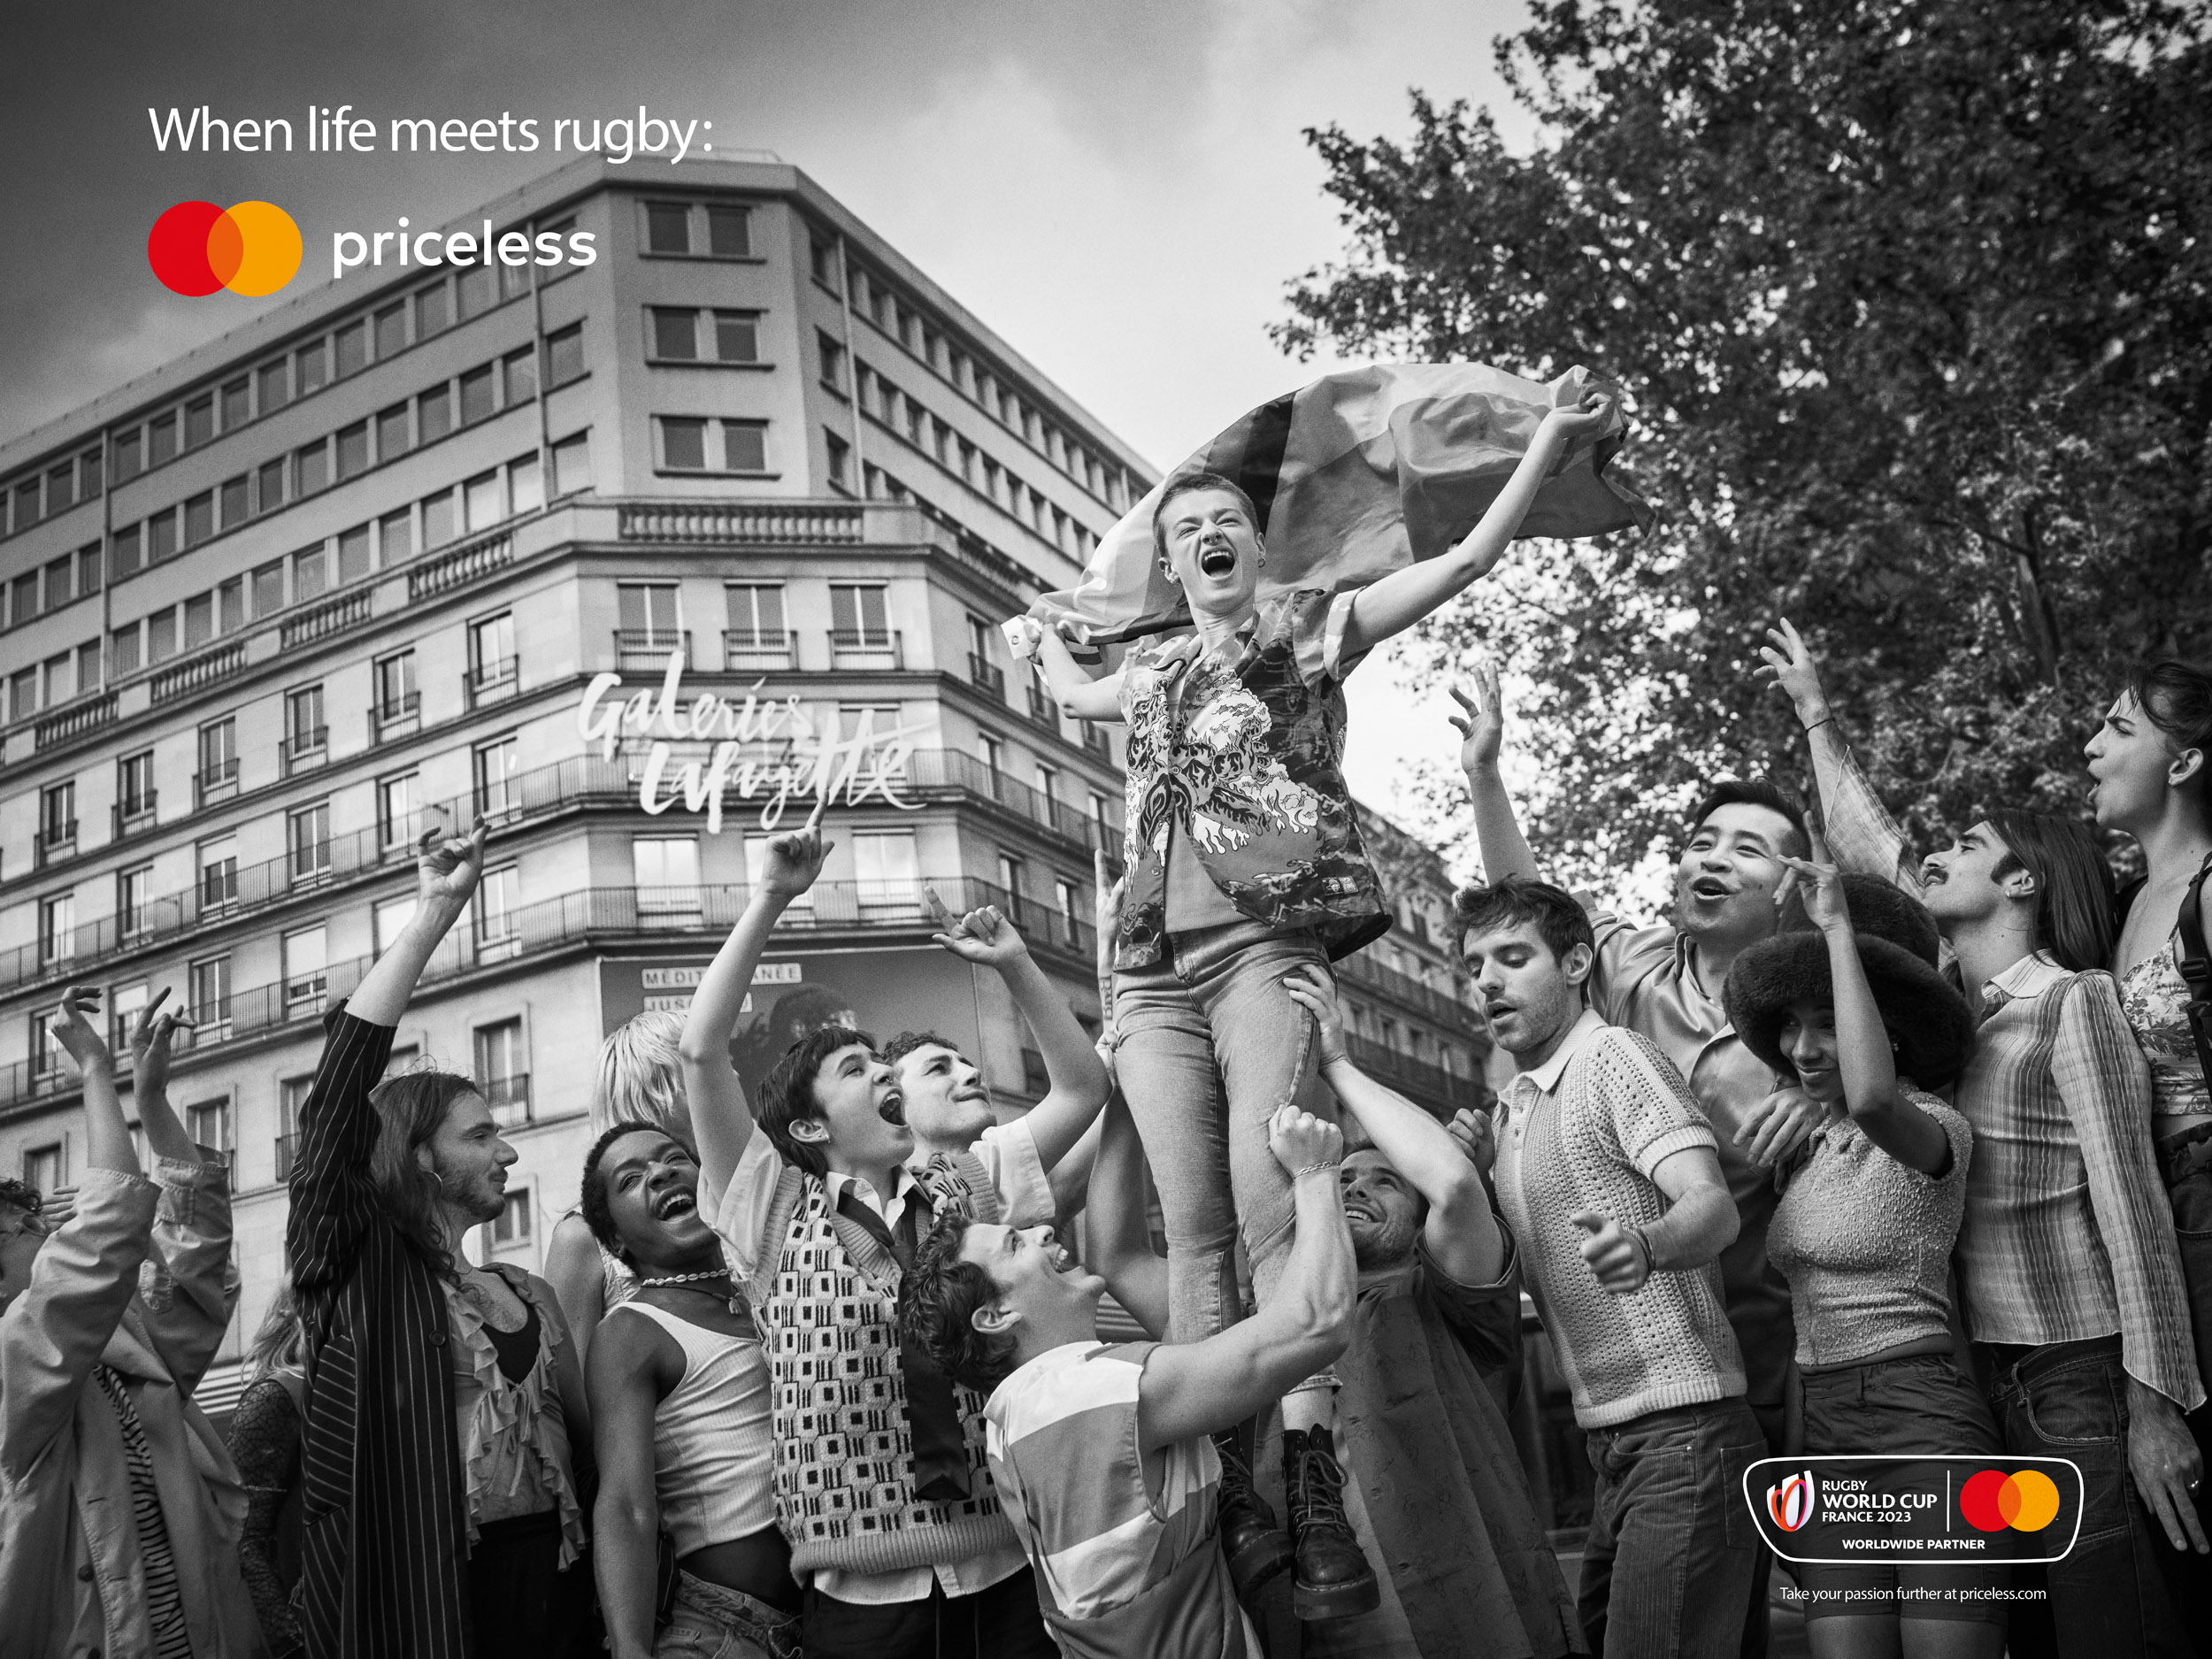 Septembre 2023 – New World wide campaign for Mastercard ‘When life meets rugby’